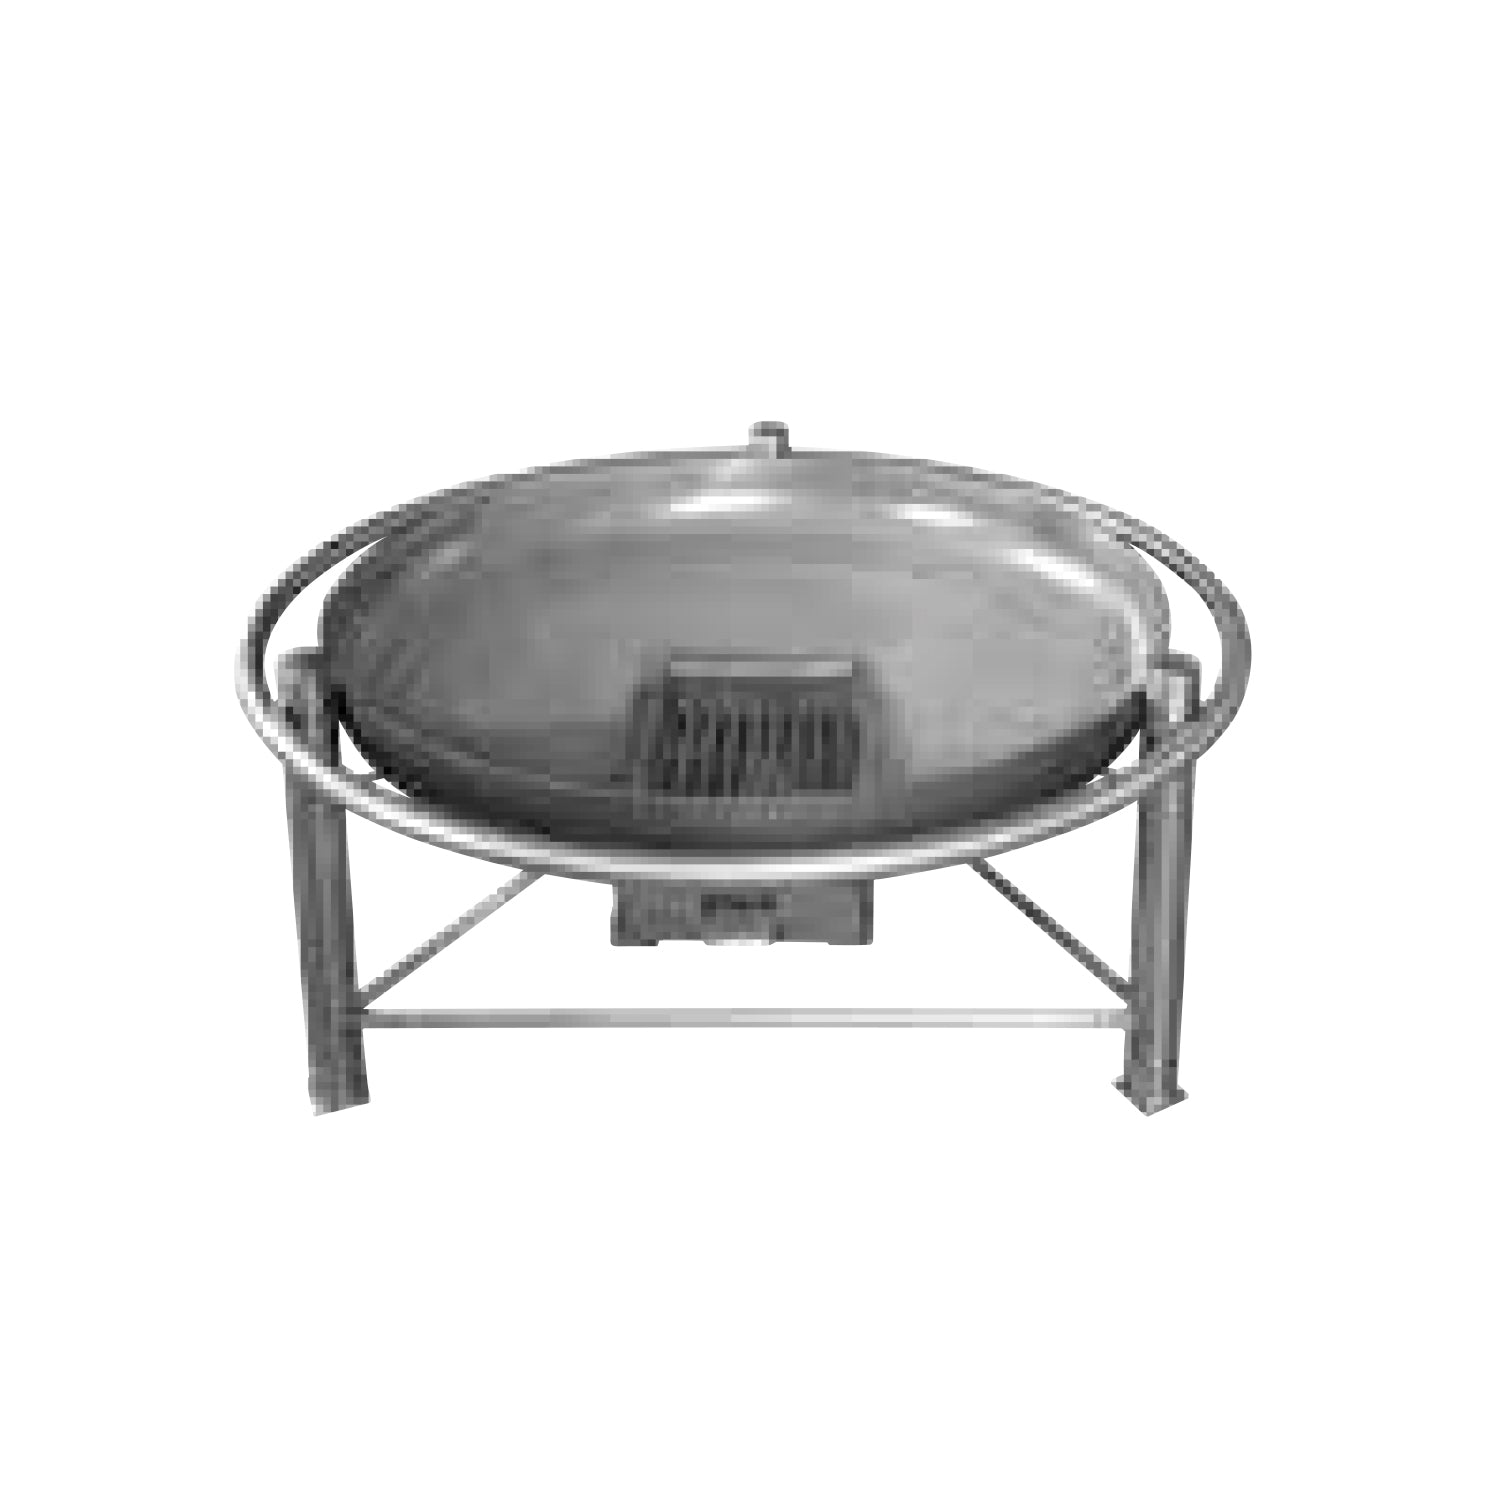 Fire bowl with protective ring for Beelonia swivel grill